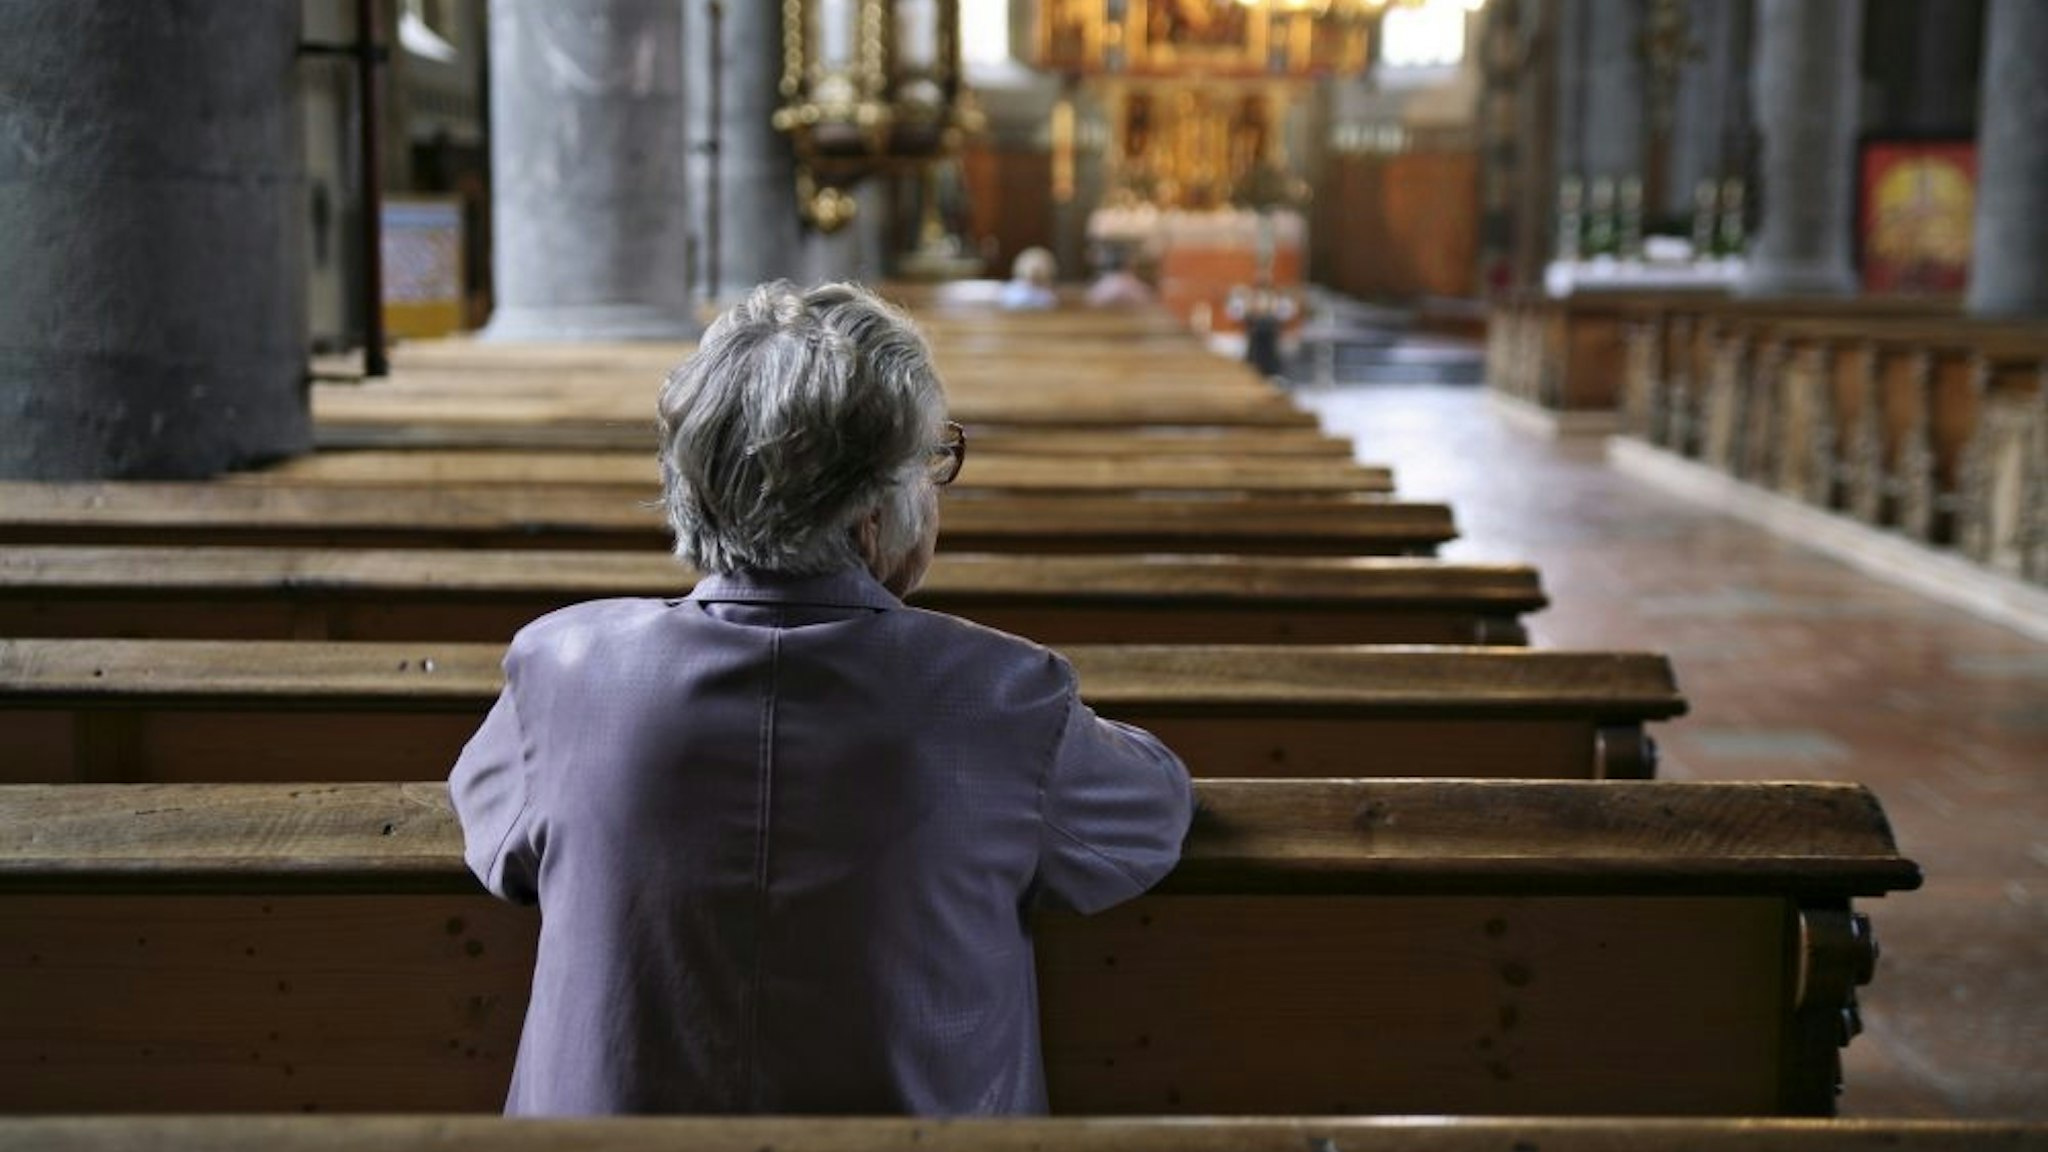 Older woman praying in an almost empty church, rear view